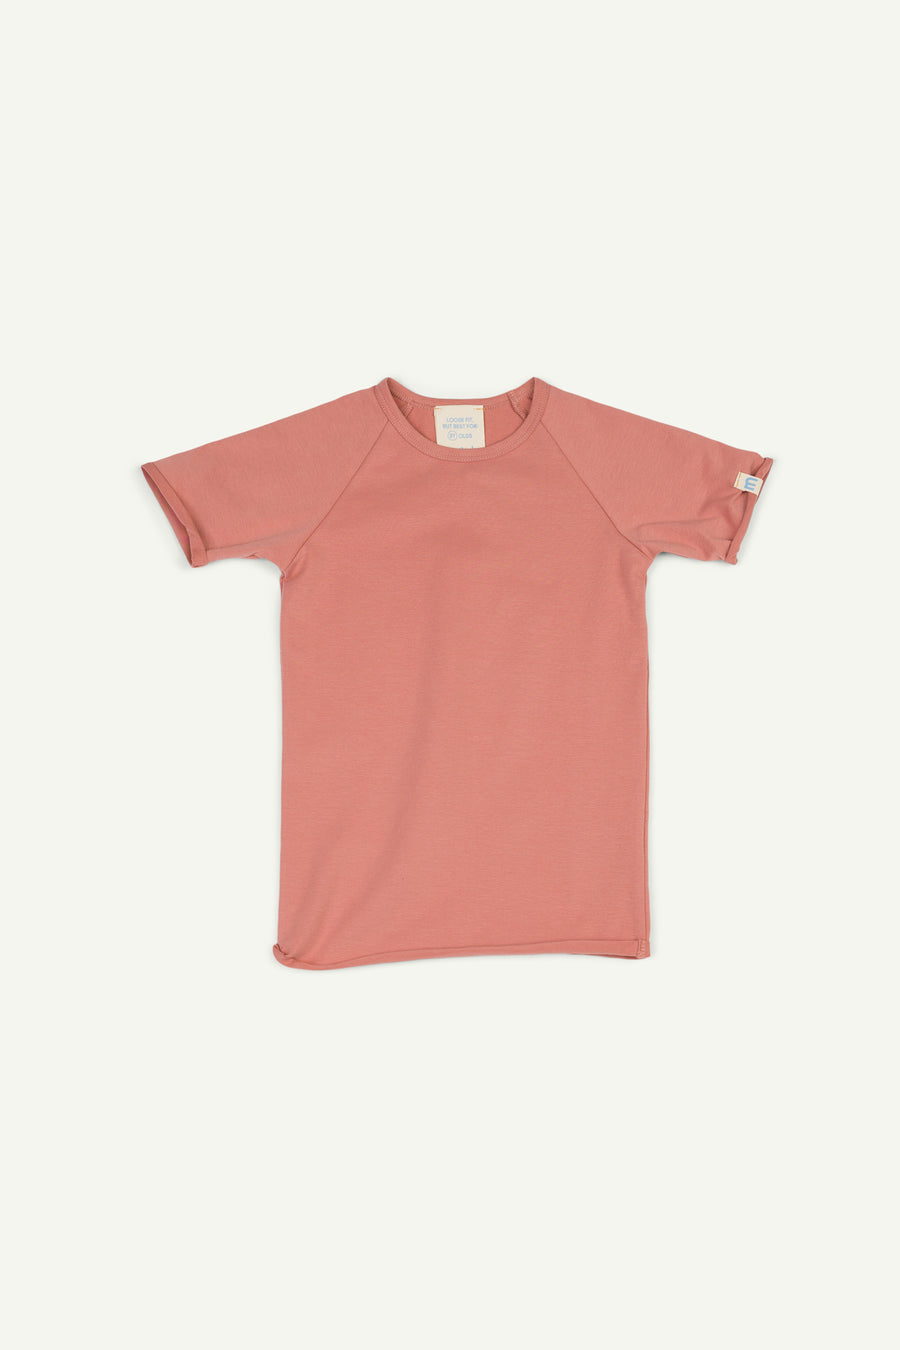 Pink t's